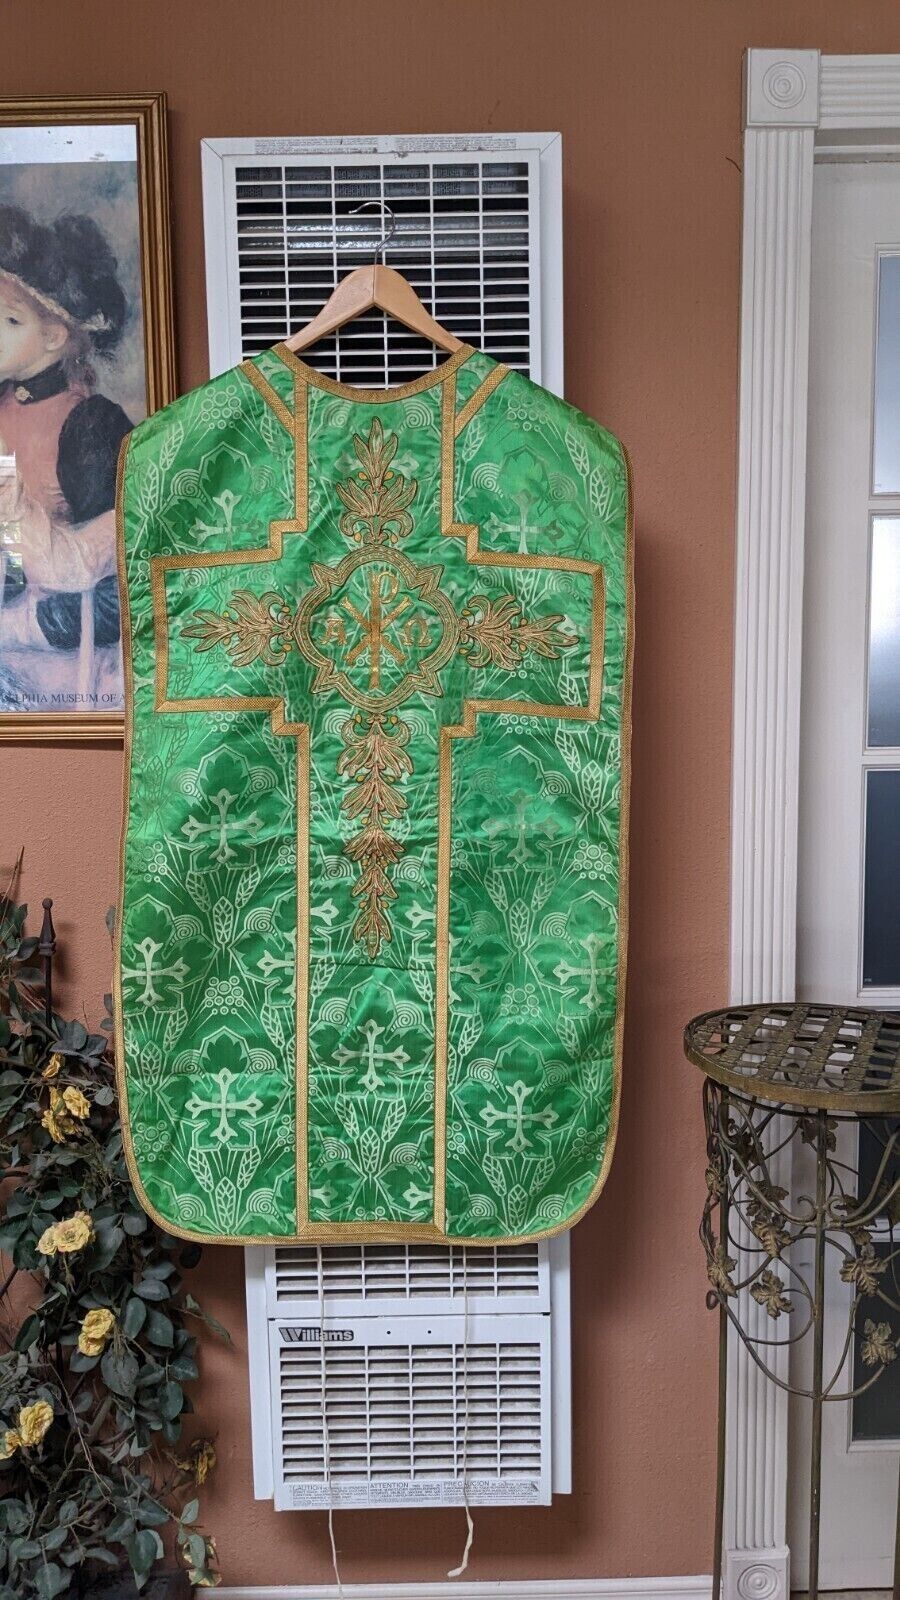 Antique Green Chasuble with Hand Done Embroidery